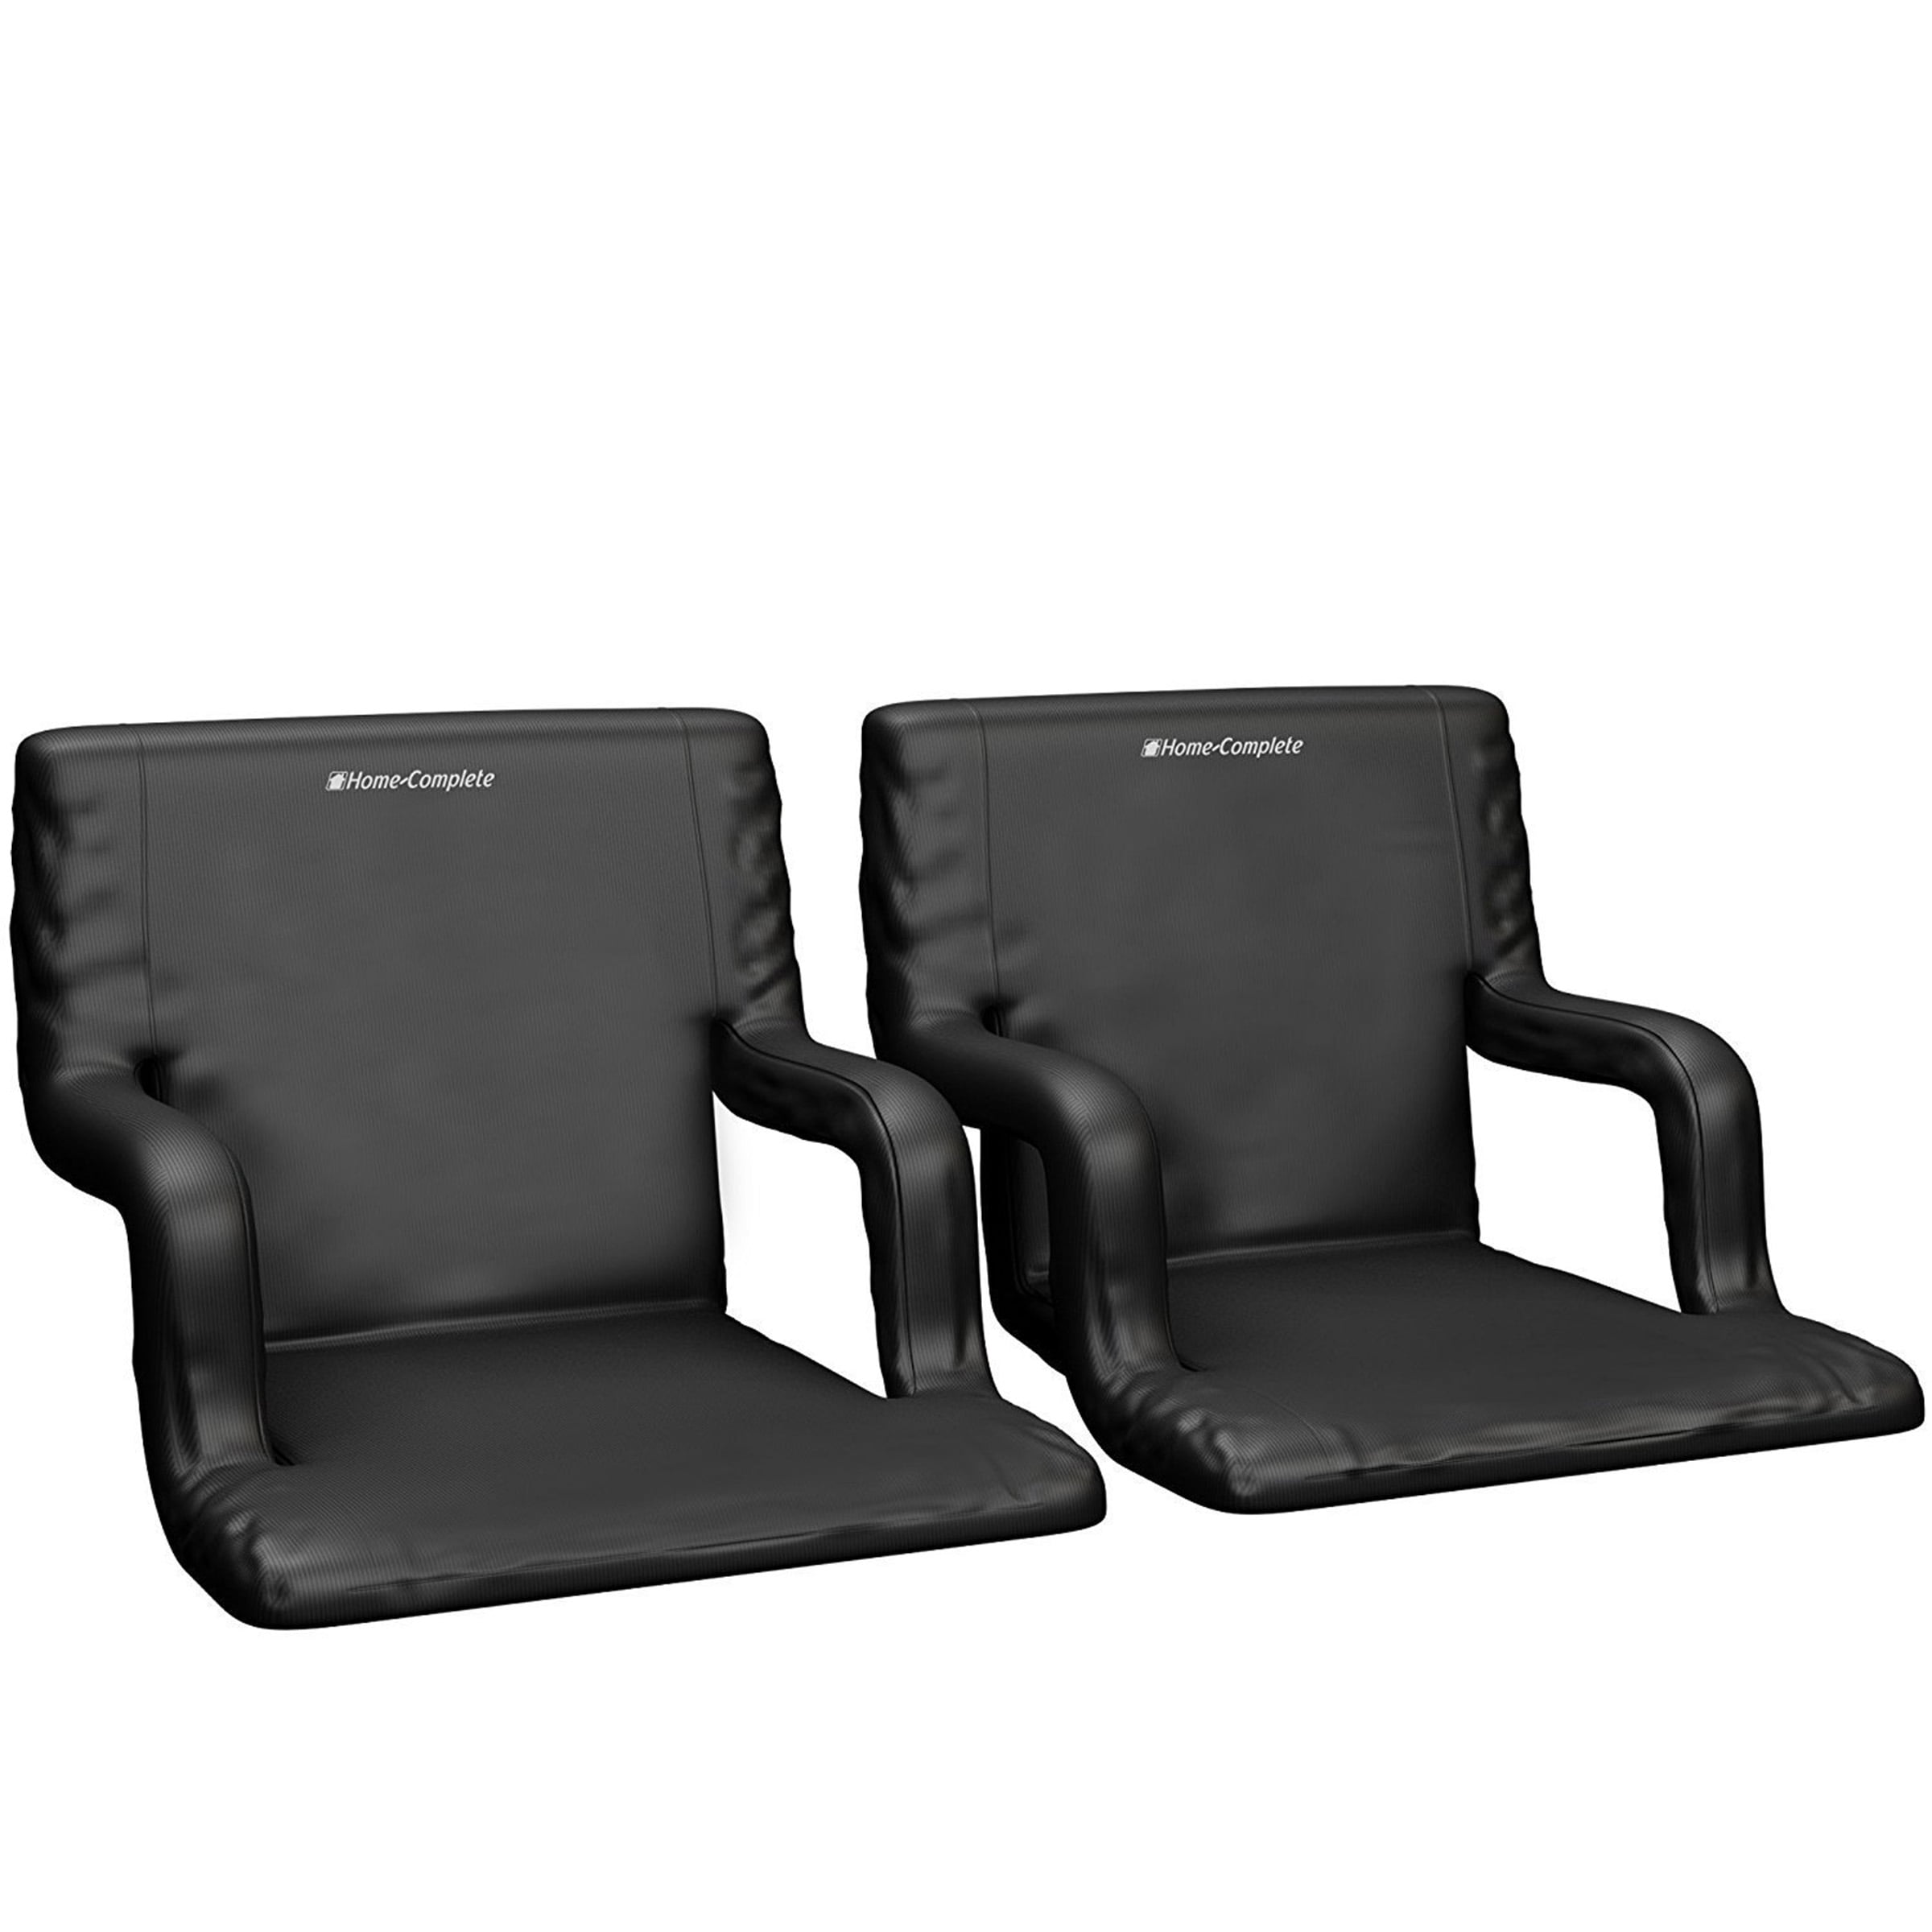 Davette Stadium SEATS with Cushion Arlmont & Co.